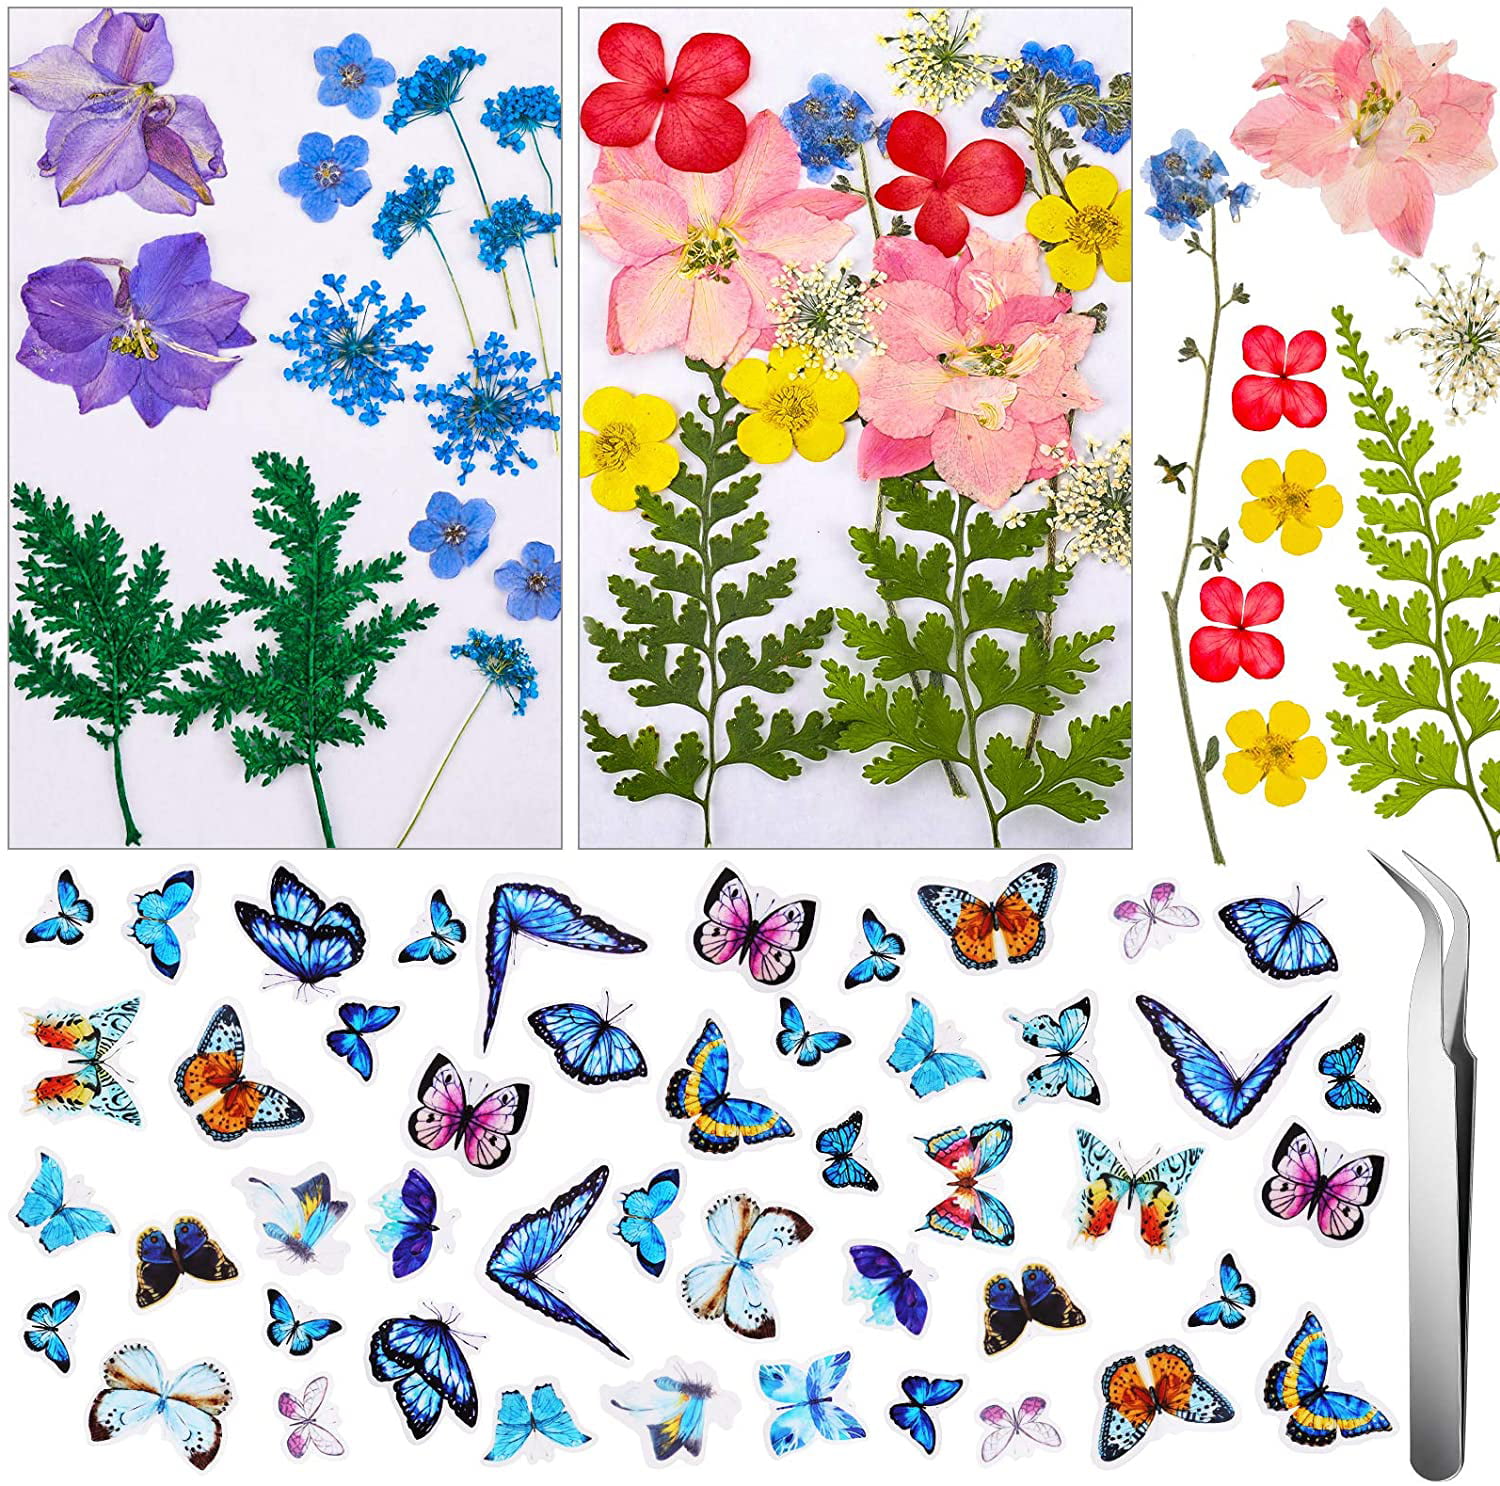 Colorful Dried Pressed Flowers Leaves and Butterfly Decorative Sticker Set Natural Real Dried Flowers Butterfly Scrapbook Decals with Curved Tweezers for Art Floral Decors DIY Resin Jewelry Crafts 